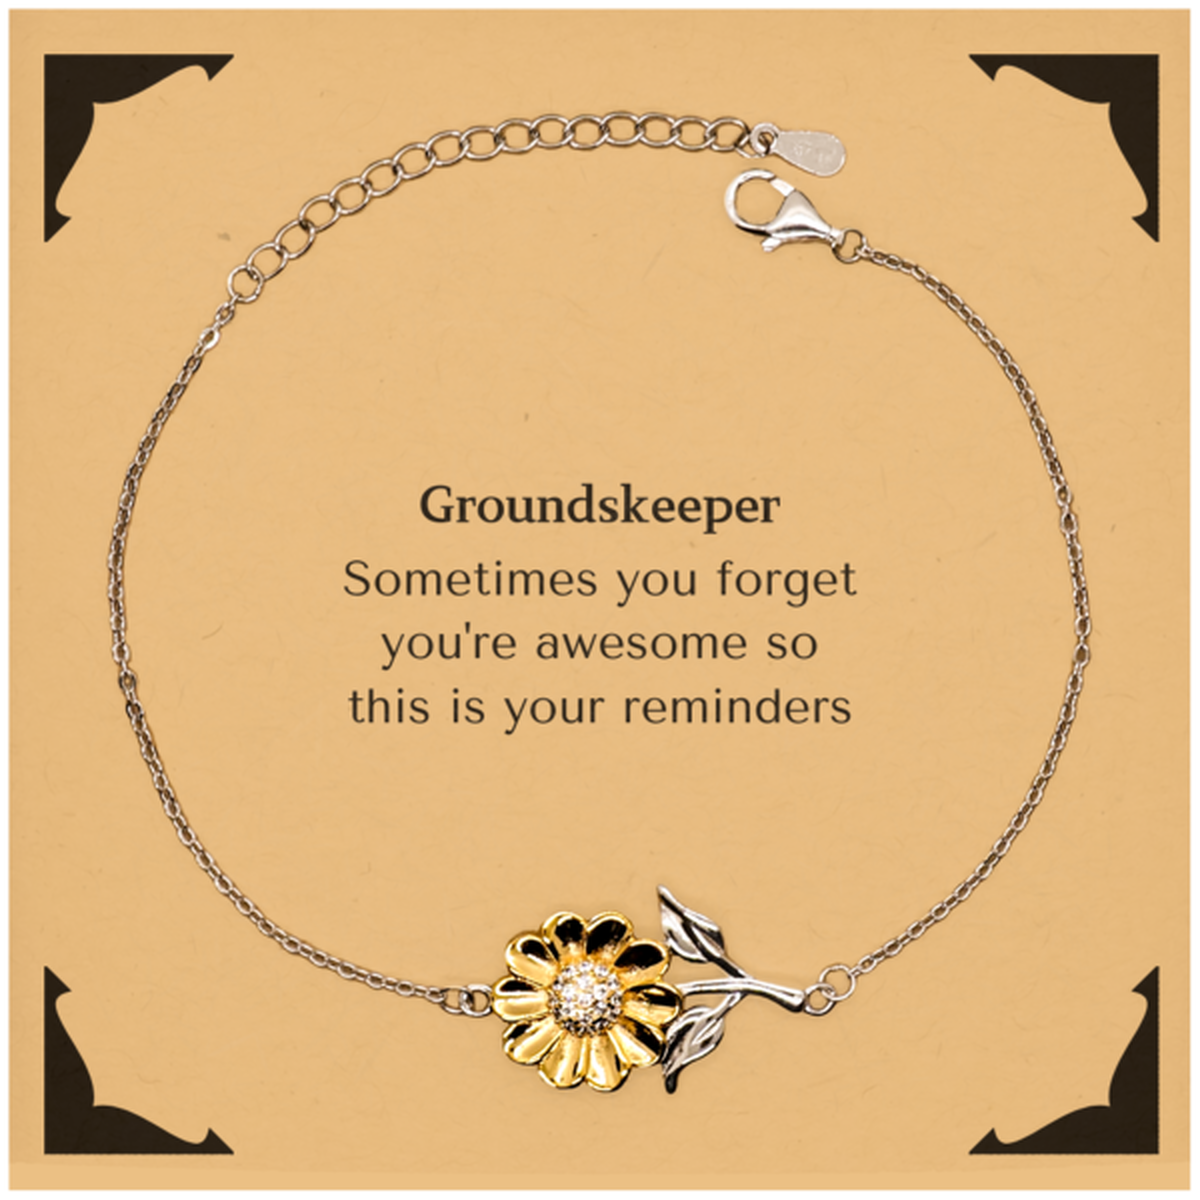 Sentimental Groundskeeper Sunflower Bracelet, Groundskeeper Sometimes you forget you're awesome so this is your reminders, Graduation Christmas Birthday Gifts for Groundskeeper, Men, Women, Coworkers